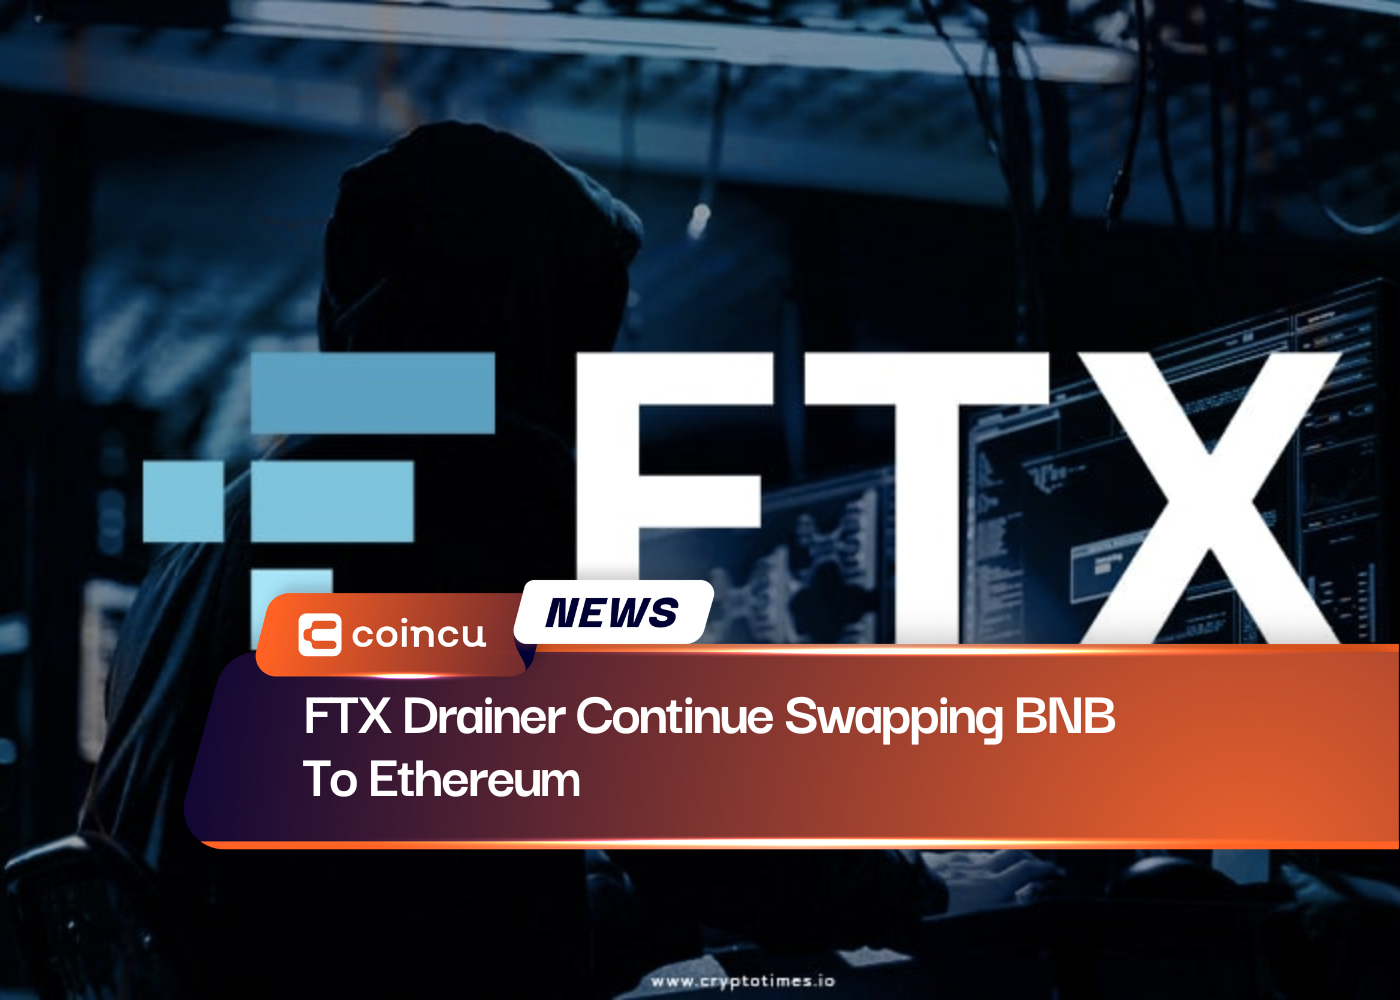 FTX Drainer Continue Swapping BNB To Ethereum